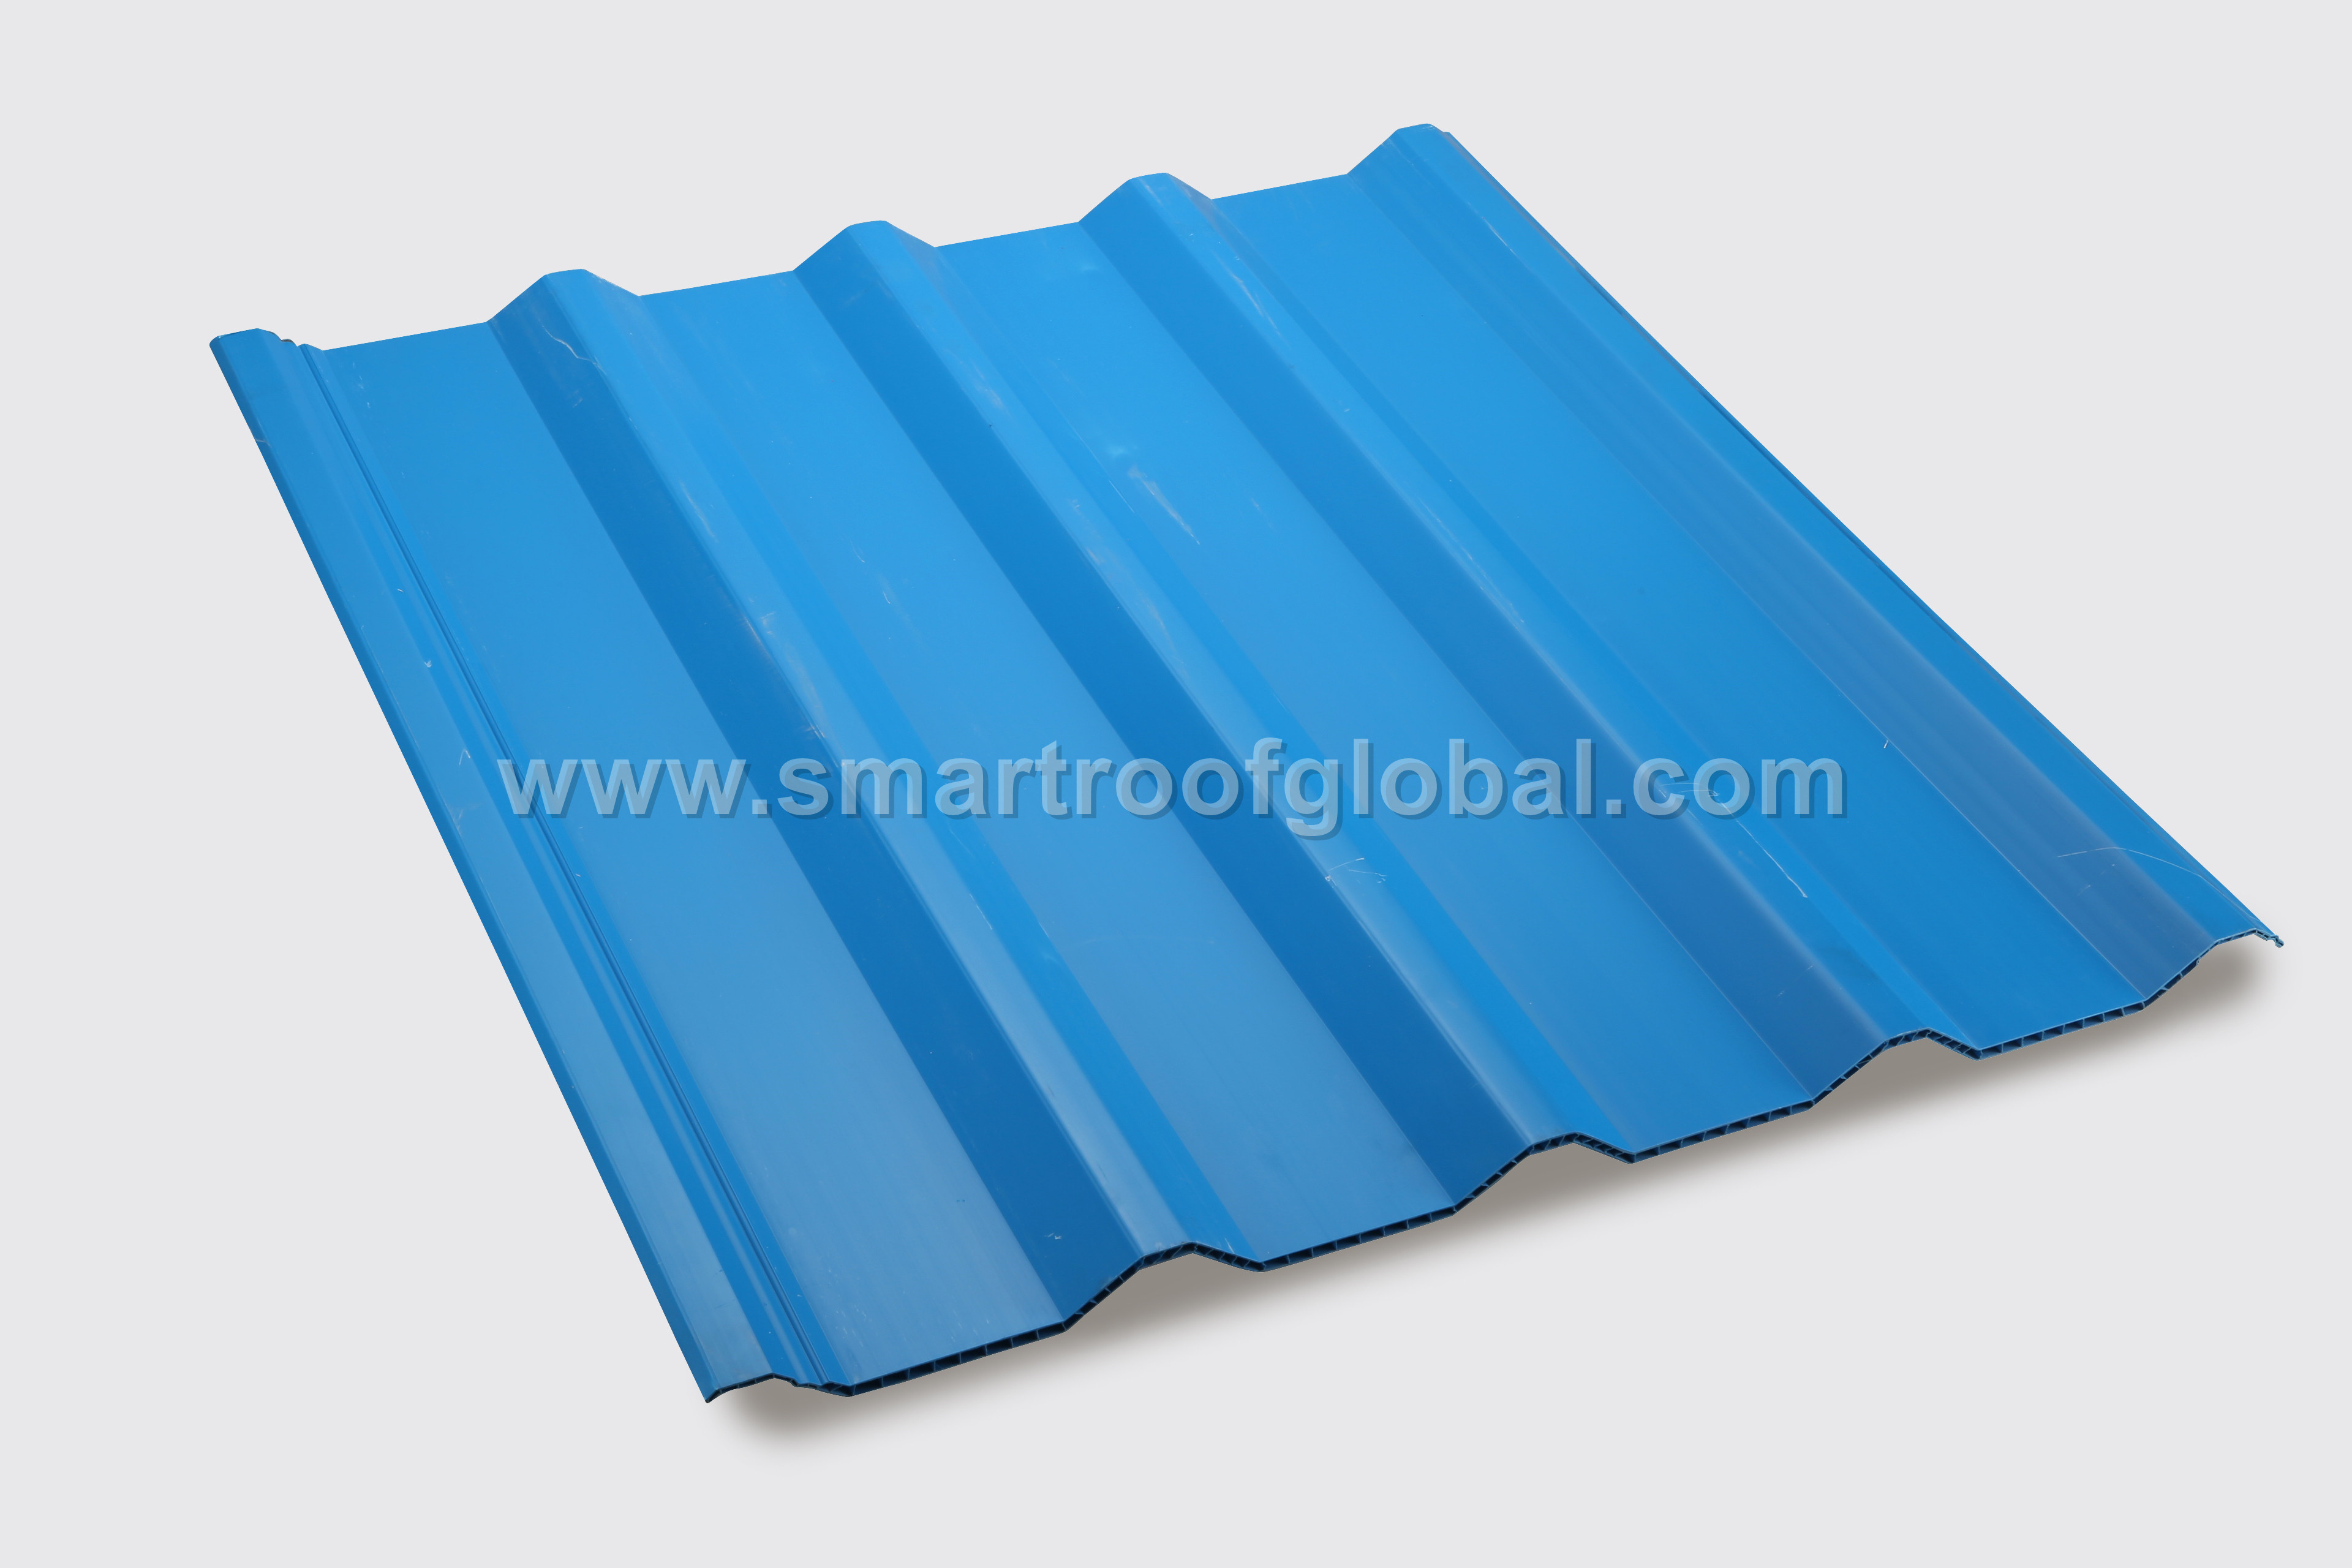 Plastic Roofing Sheets, Corrugated Plastic Roofing Sheets Suppliers